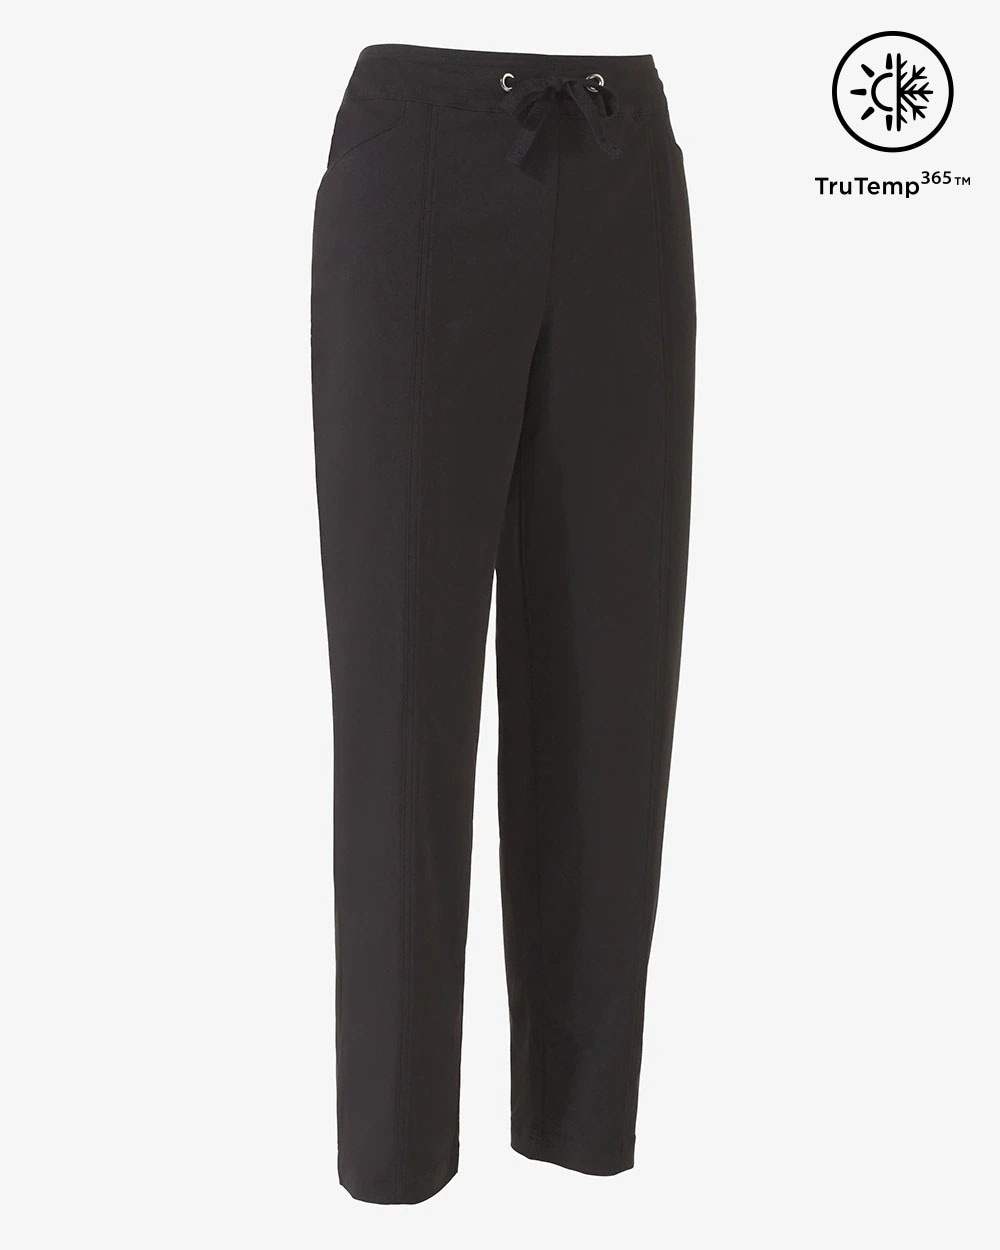 Weekends Perfect Stretch TruTemp 365 Drawstring Pants